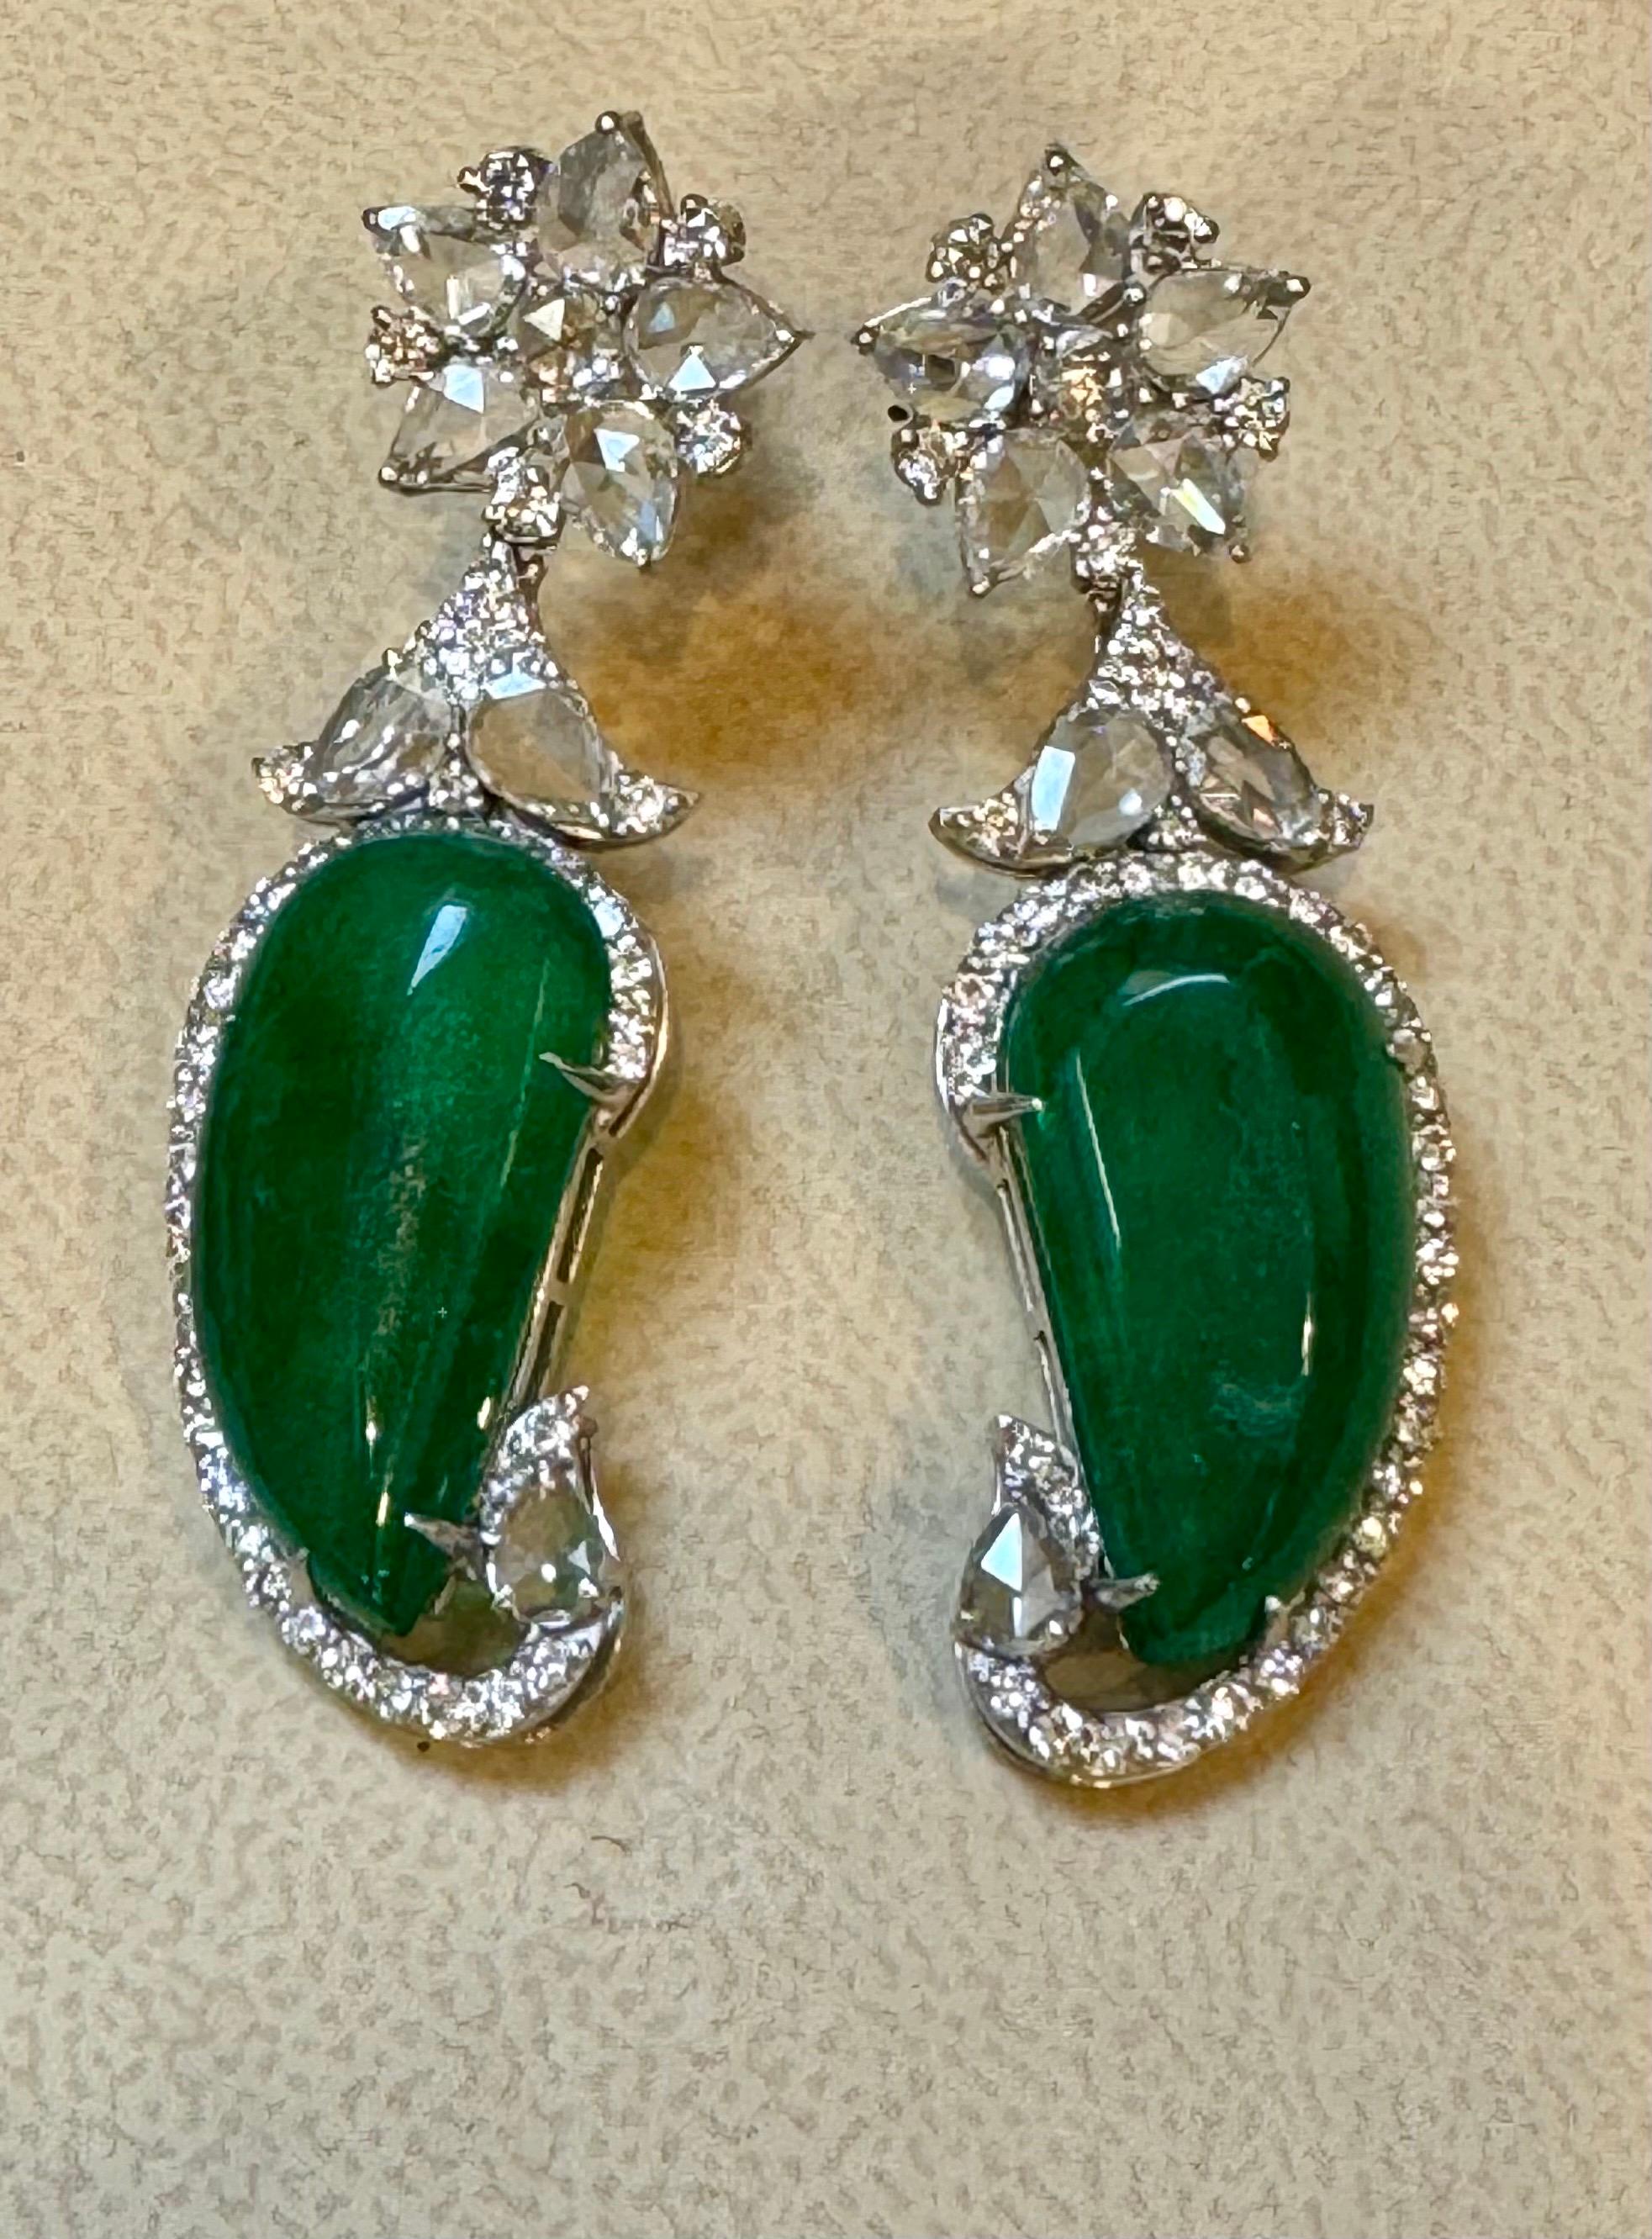 20 Ct Fine Emerald Cabochon & 4 Ct Rose Cut Diamond  18 Kt White Gold  Earrings For Sale 5